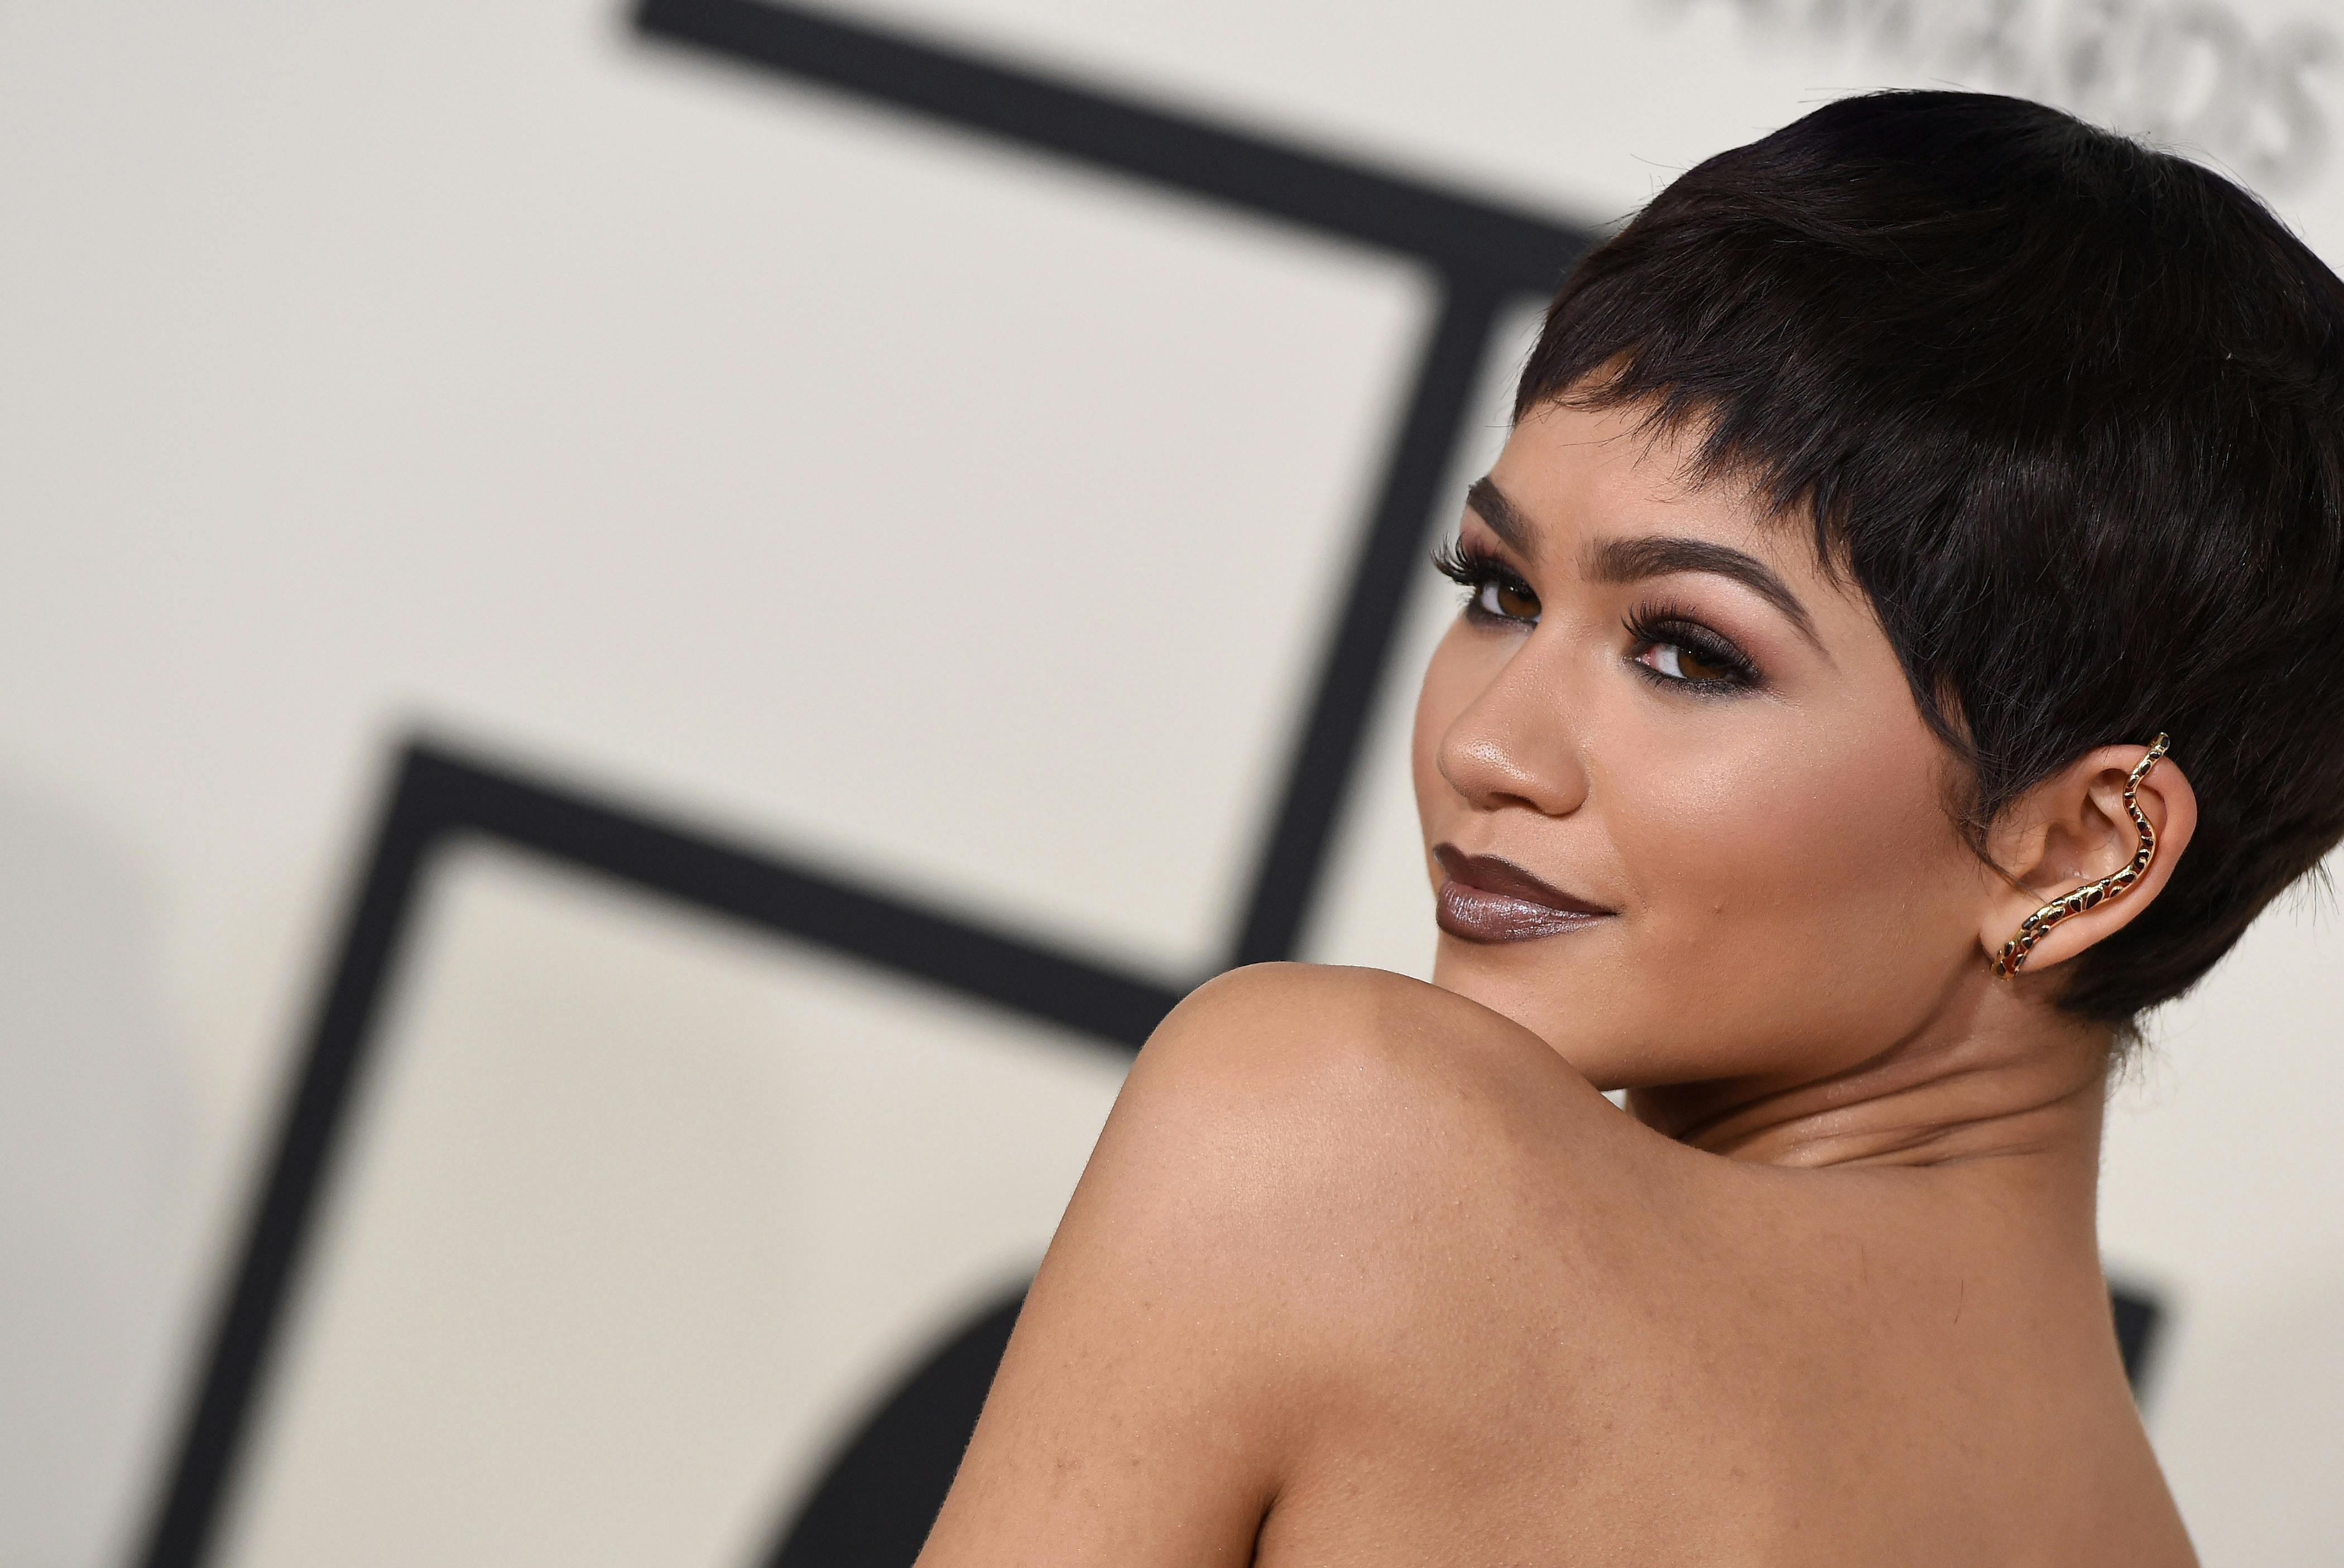 The Best Pixie Cuts To Suit Any Face Shape - Grazia | Beauty & Hair | Grazia